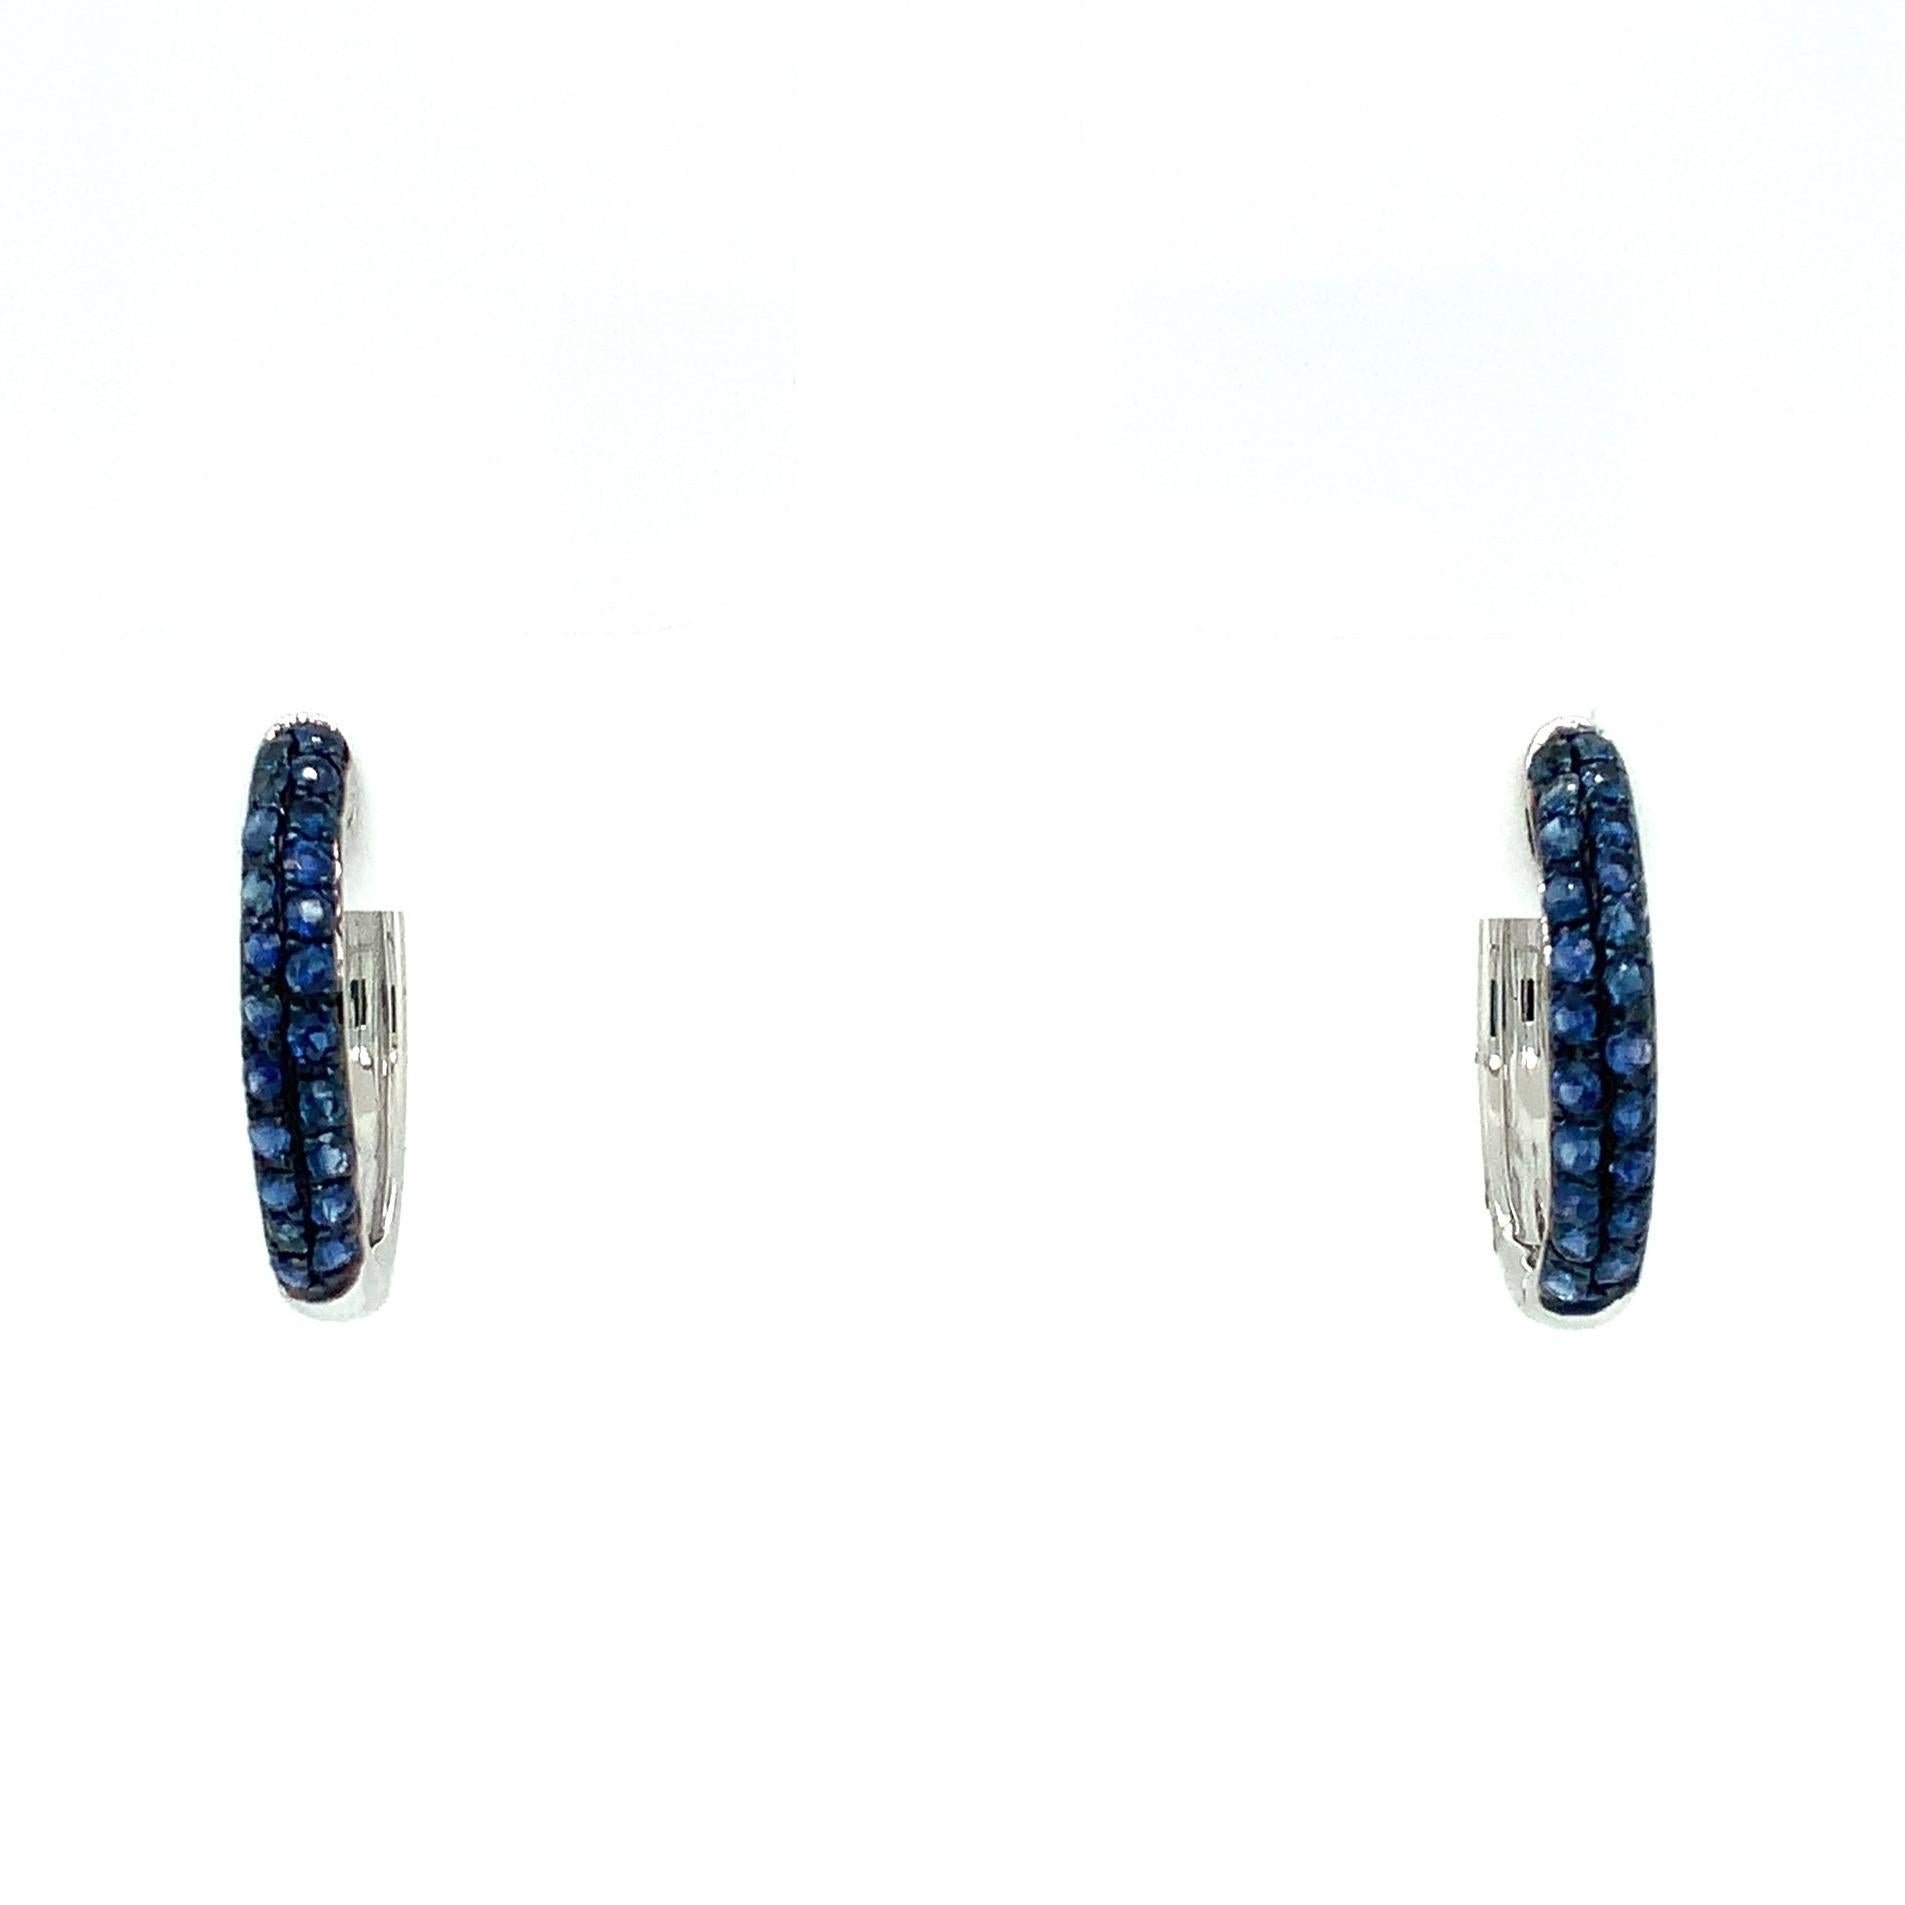 Afarin Collection Pavé Blue Sapphire Huggies Earrings set in 18K White Gold and Black Rhodium Finished. These Vibrant Blue Sapphires are stunning and make a great foundation to hang your favorite drop on!
42 Round Brilliant Cut Natural Blue